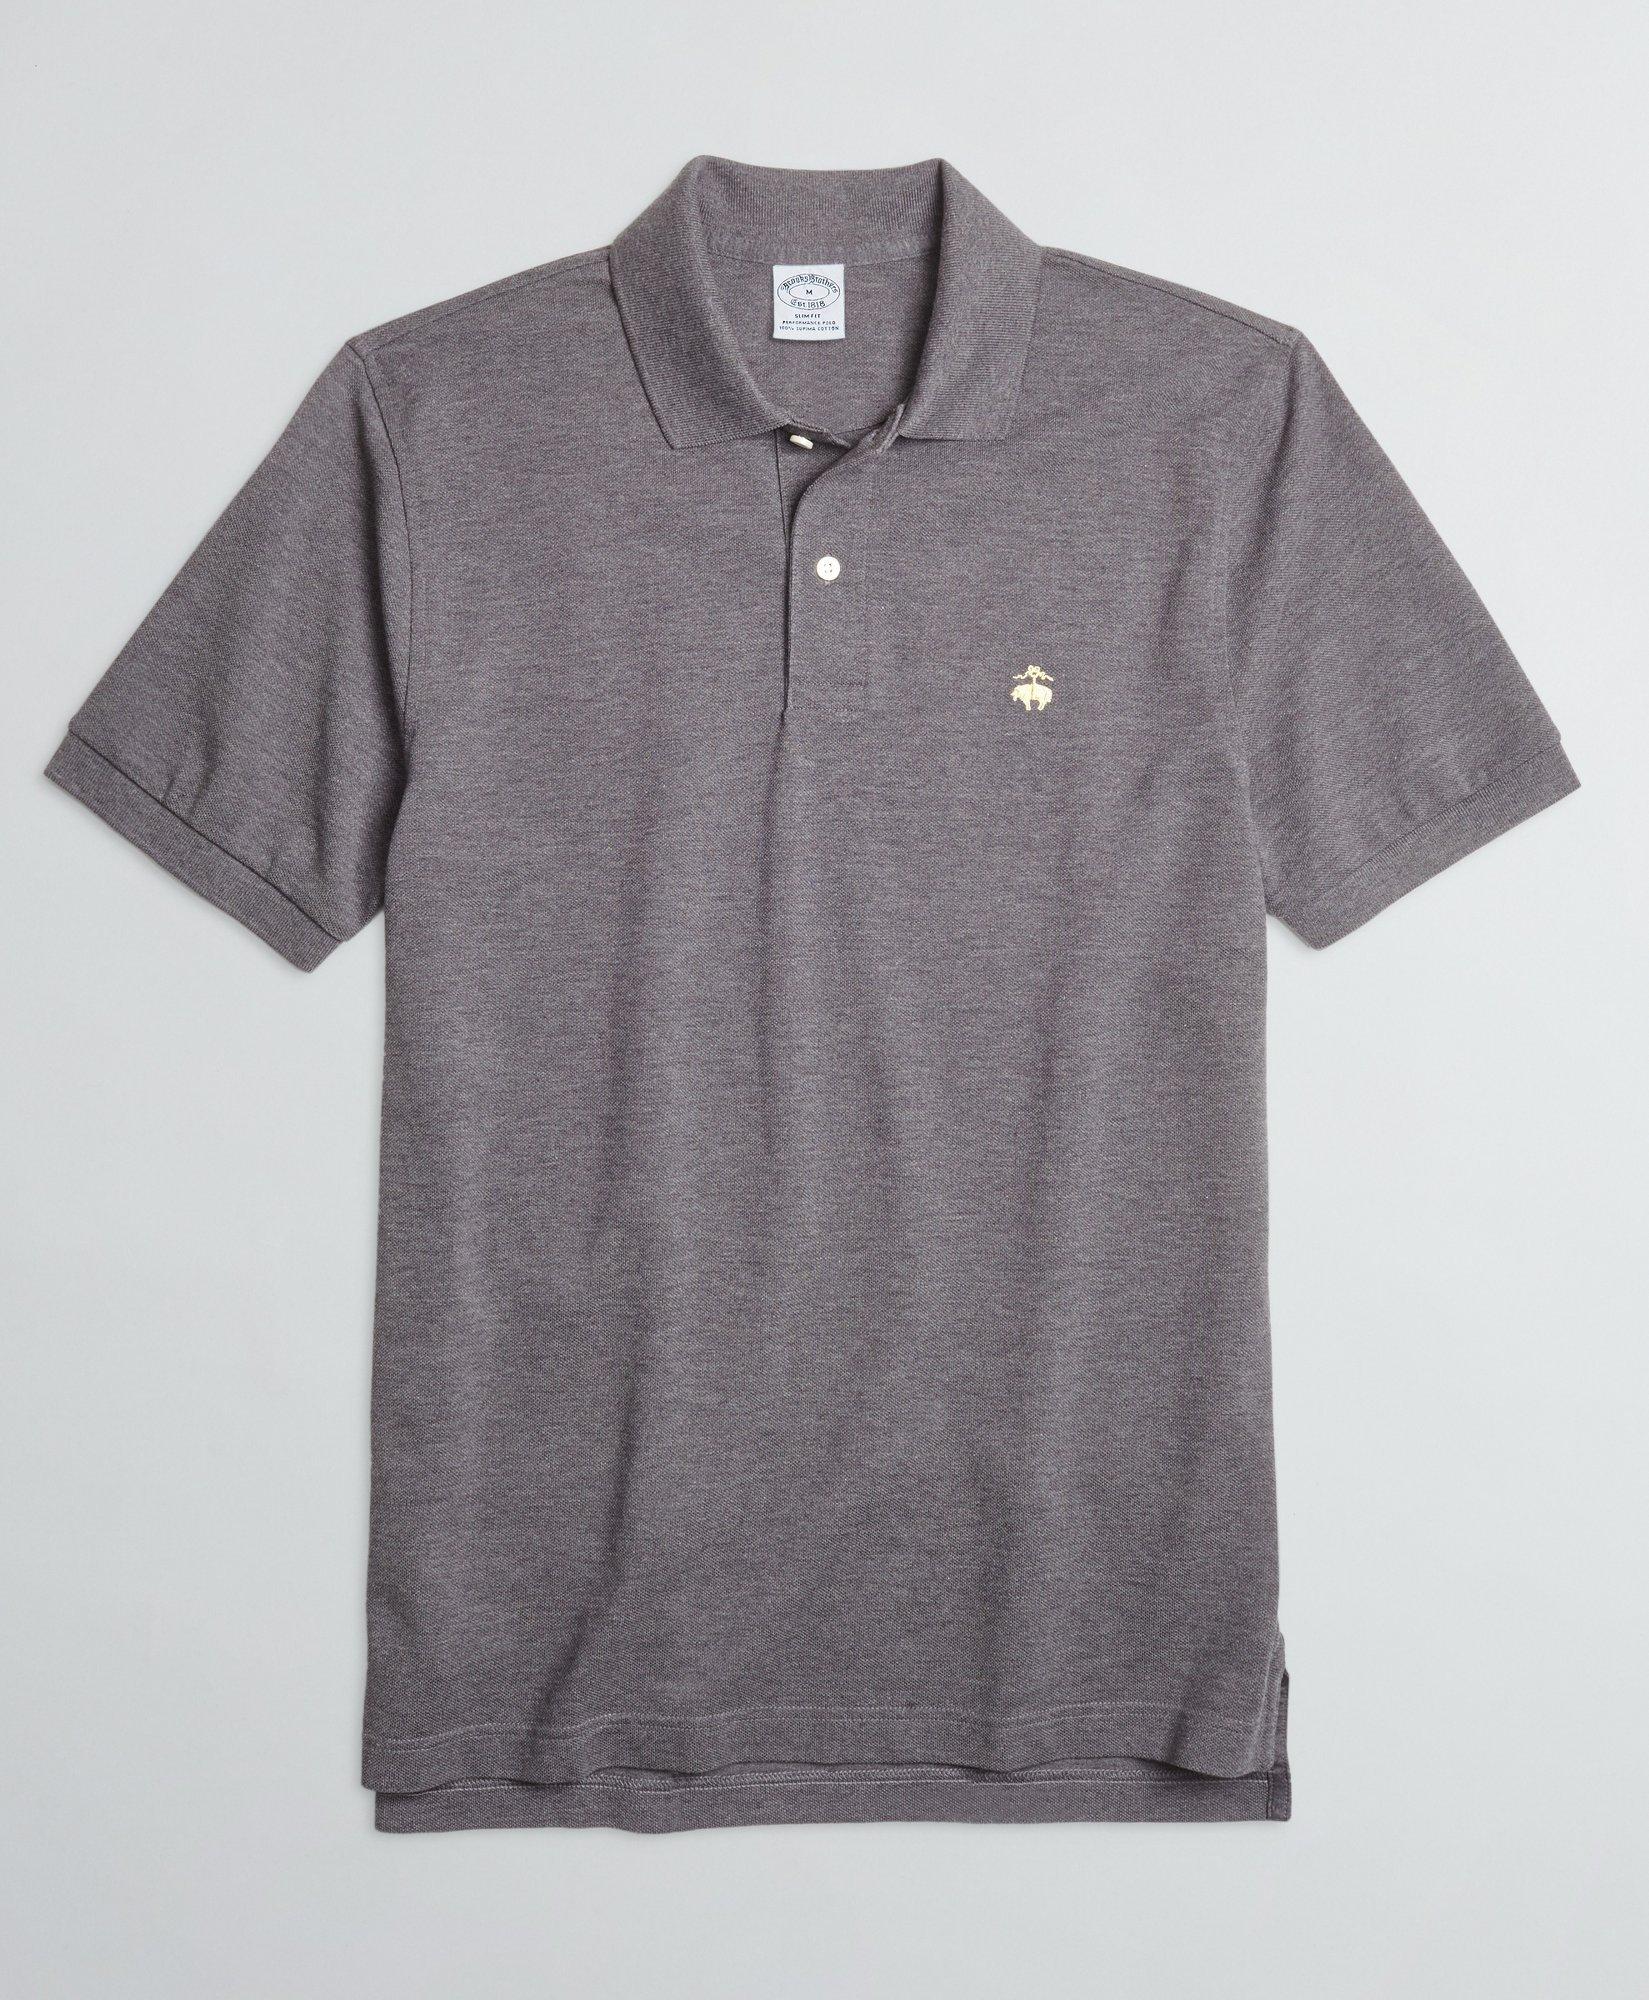 Brooks Brothers Golden Fleece Stretch Supima Polo Shirt | Charcoal Heather | Size 2xl